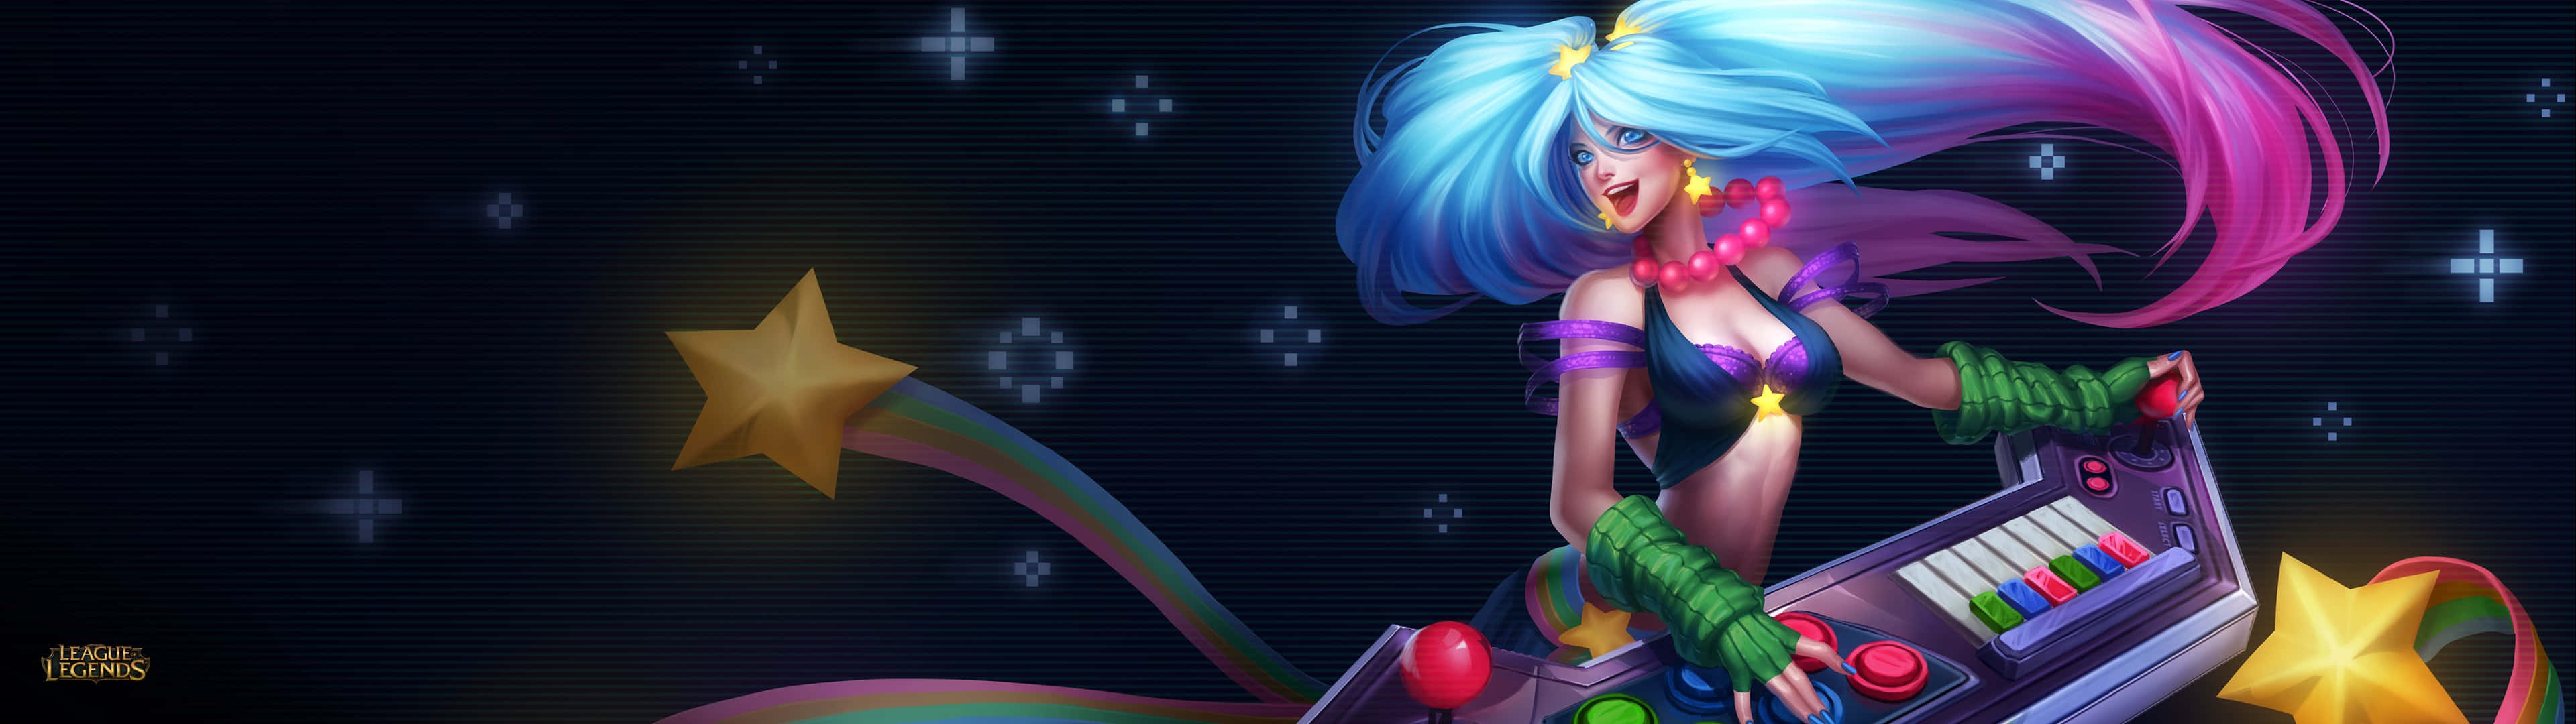 Play the epic battle of League of Legends in stunning 3840x1080 resolution Wallpaper